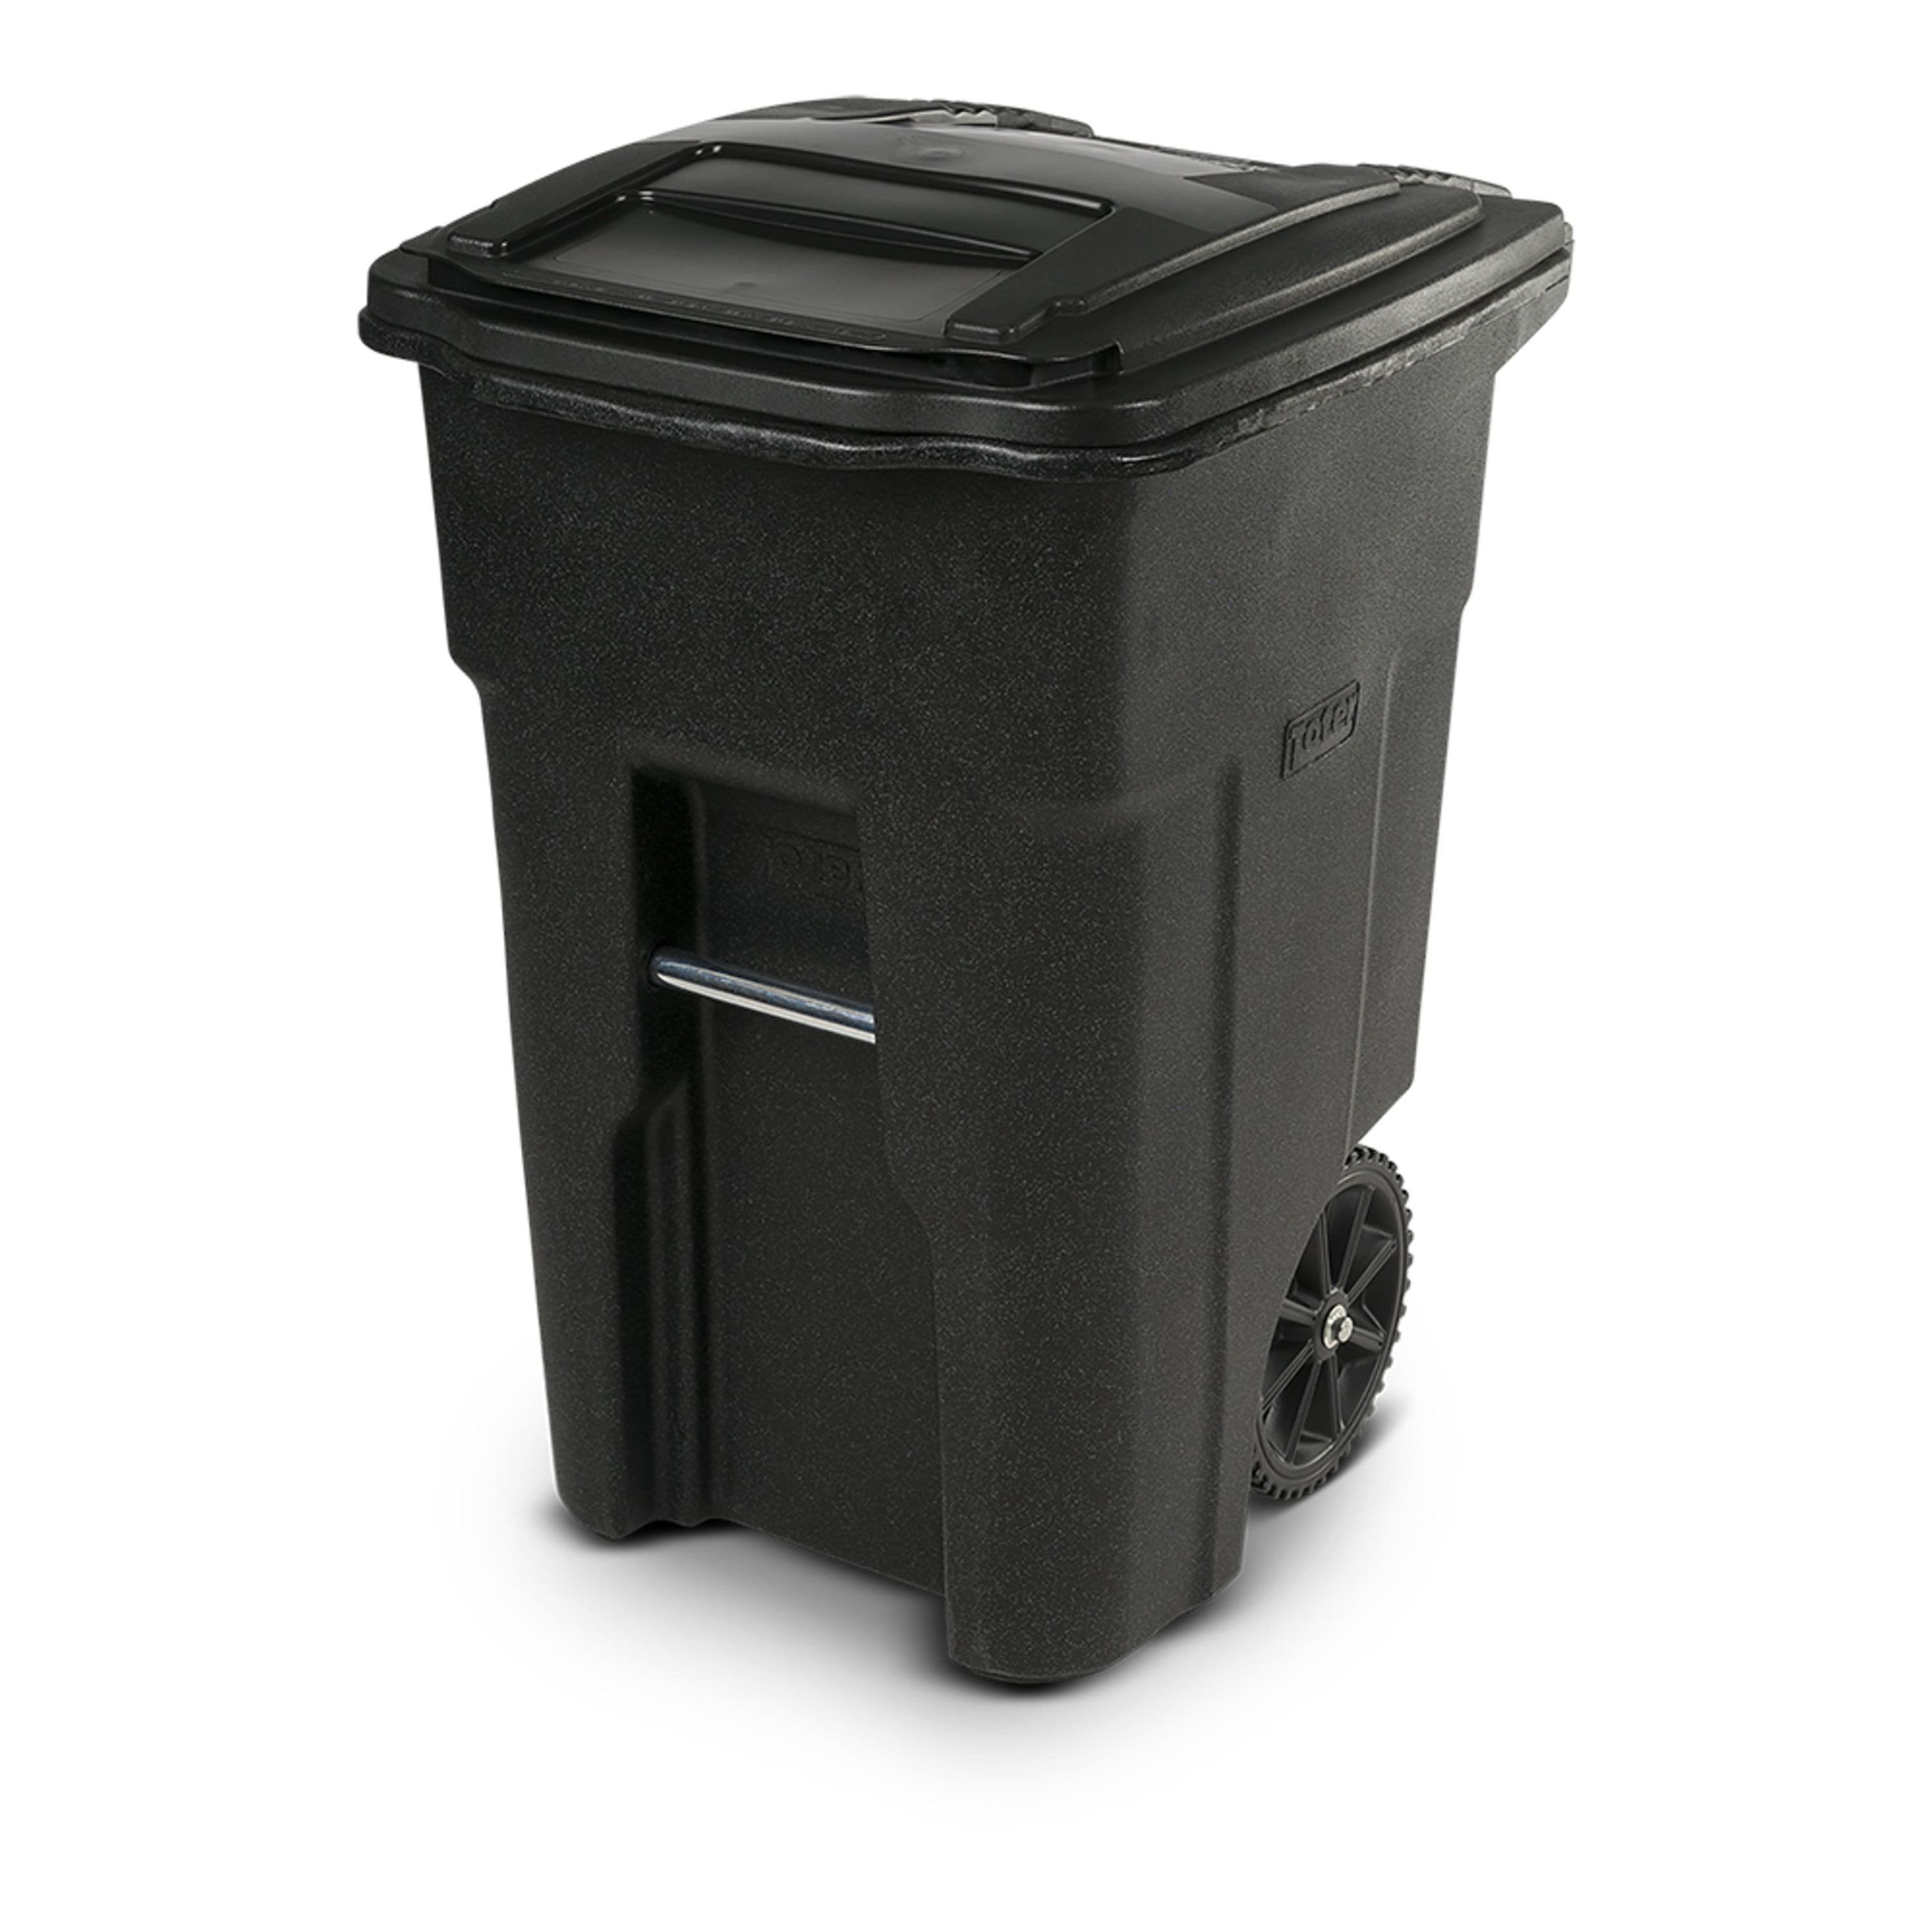 Plastic Replacement Black Cover Hinge Rubbermaid Trash Can Lid Roughneck 45 Gal 